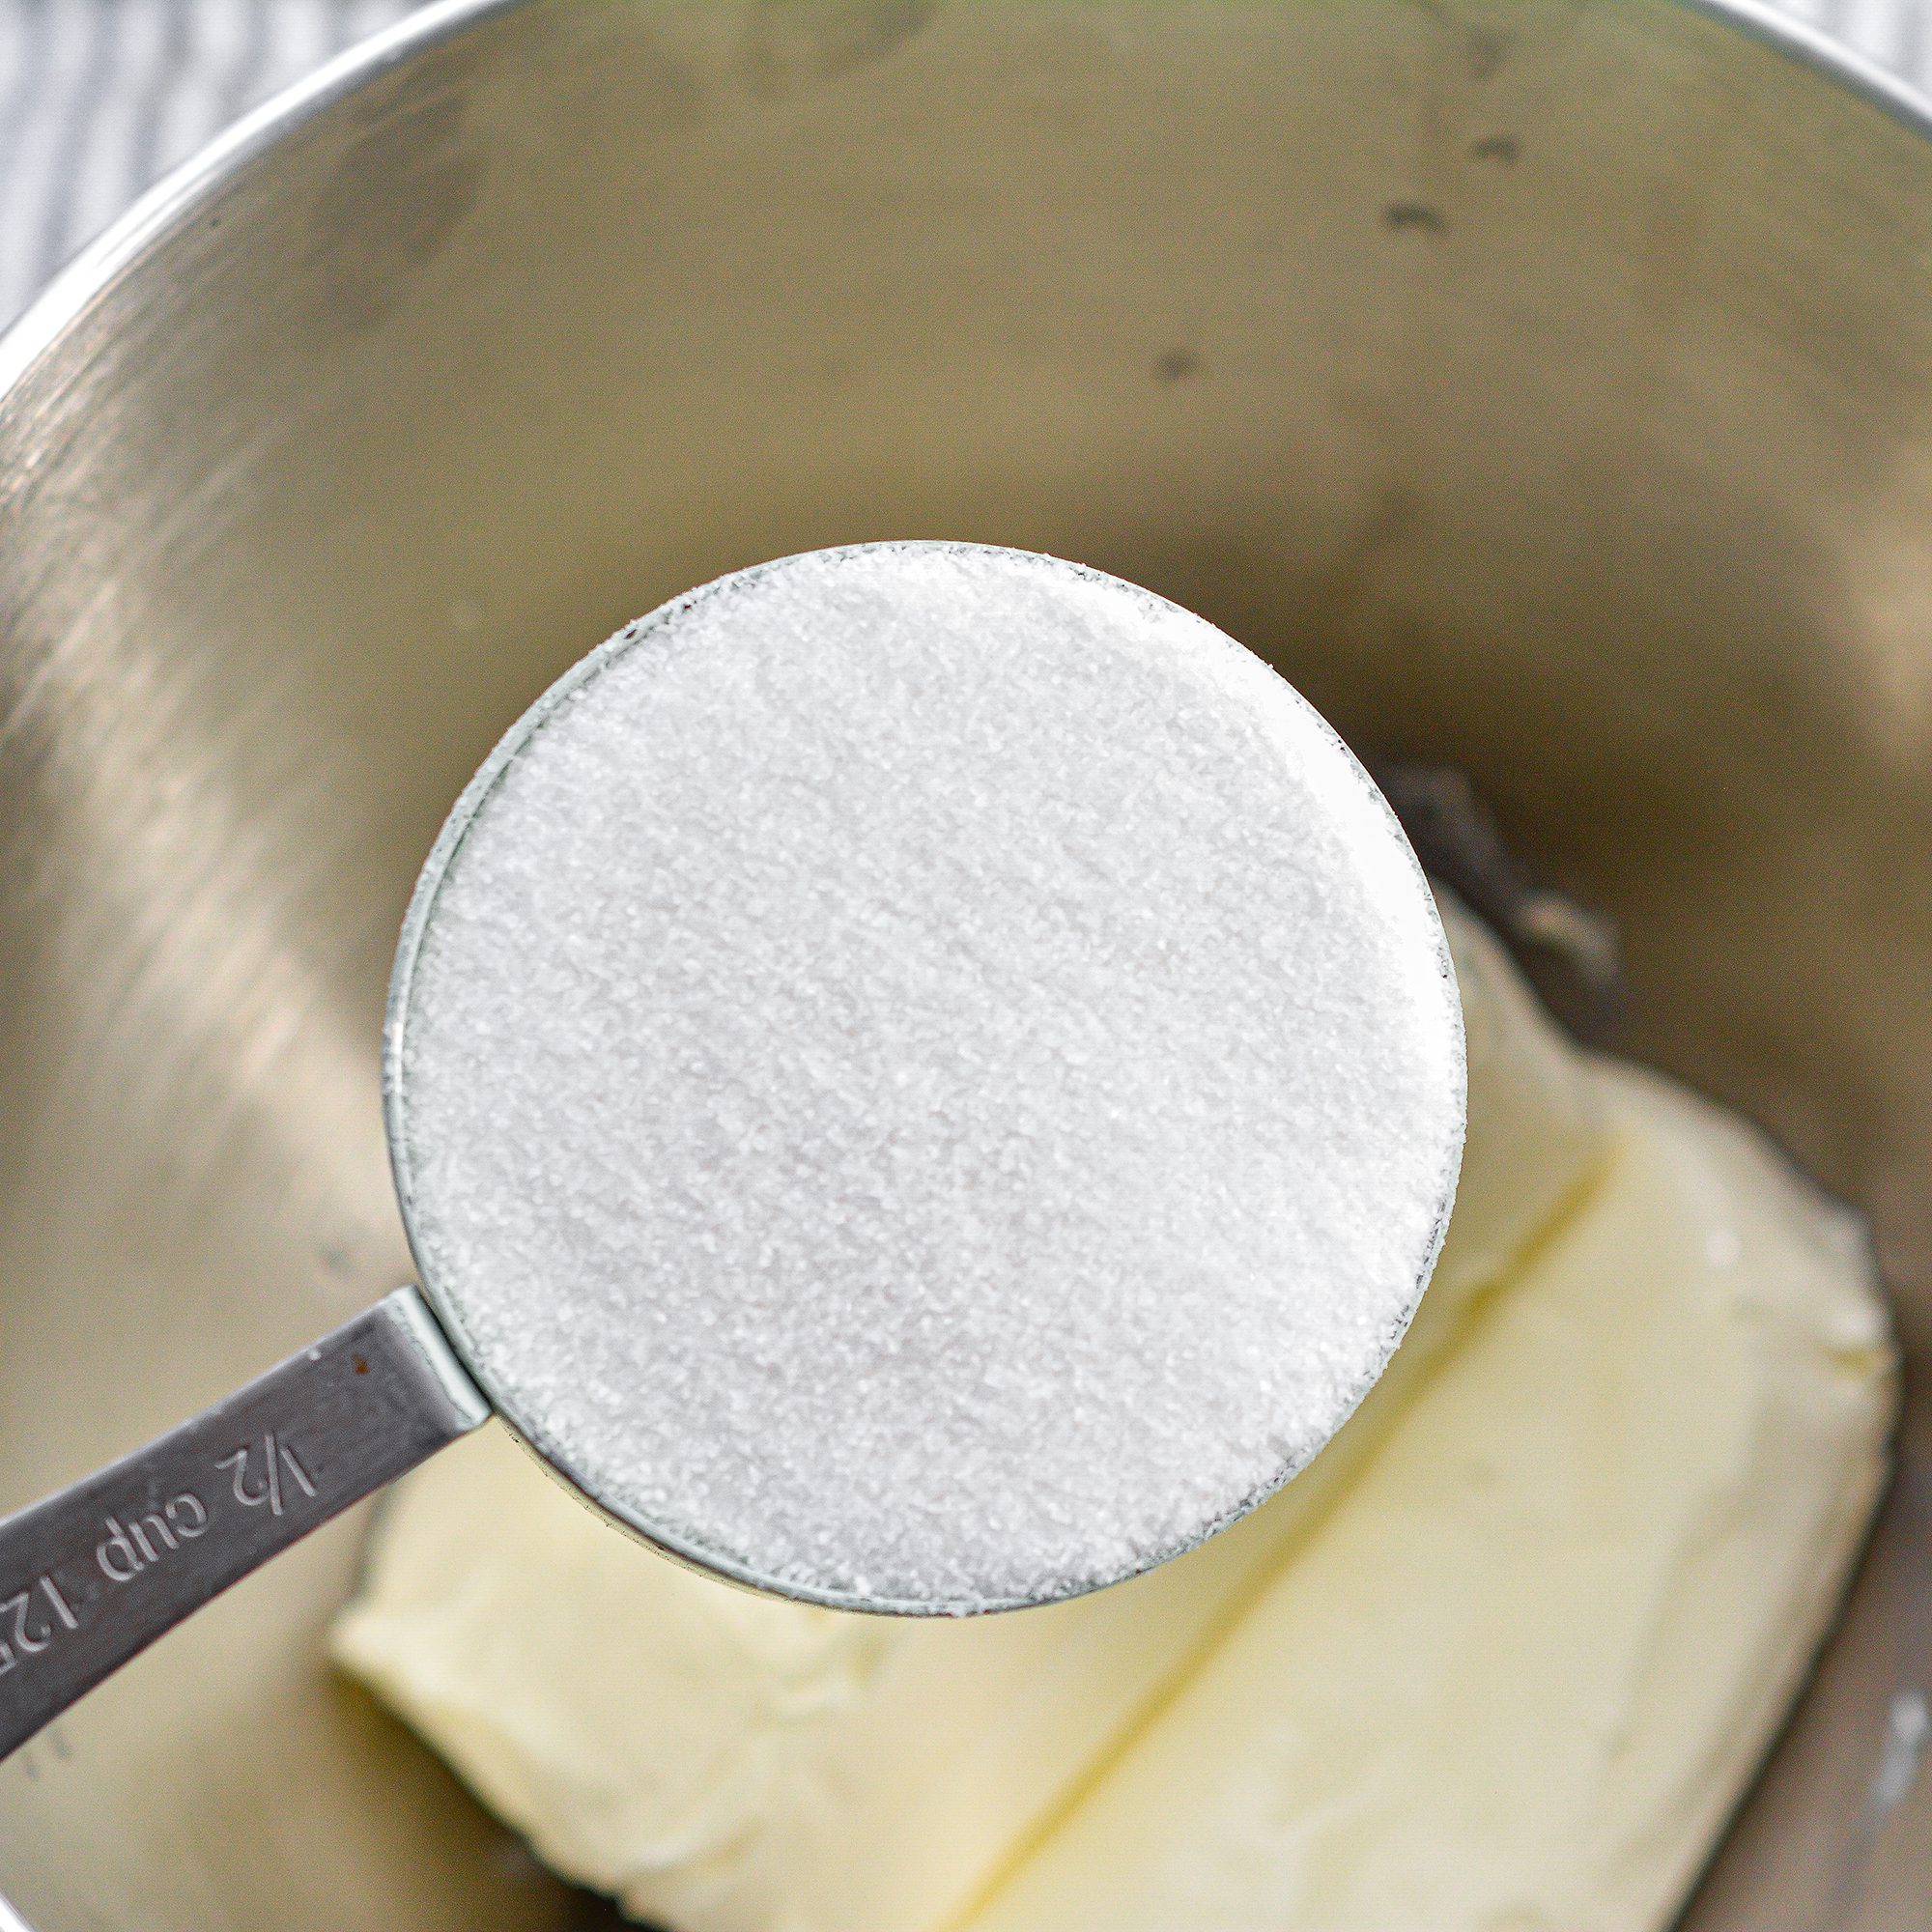 Beat together the cream cheese and ½ cup sugar until smooth.